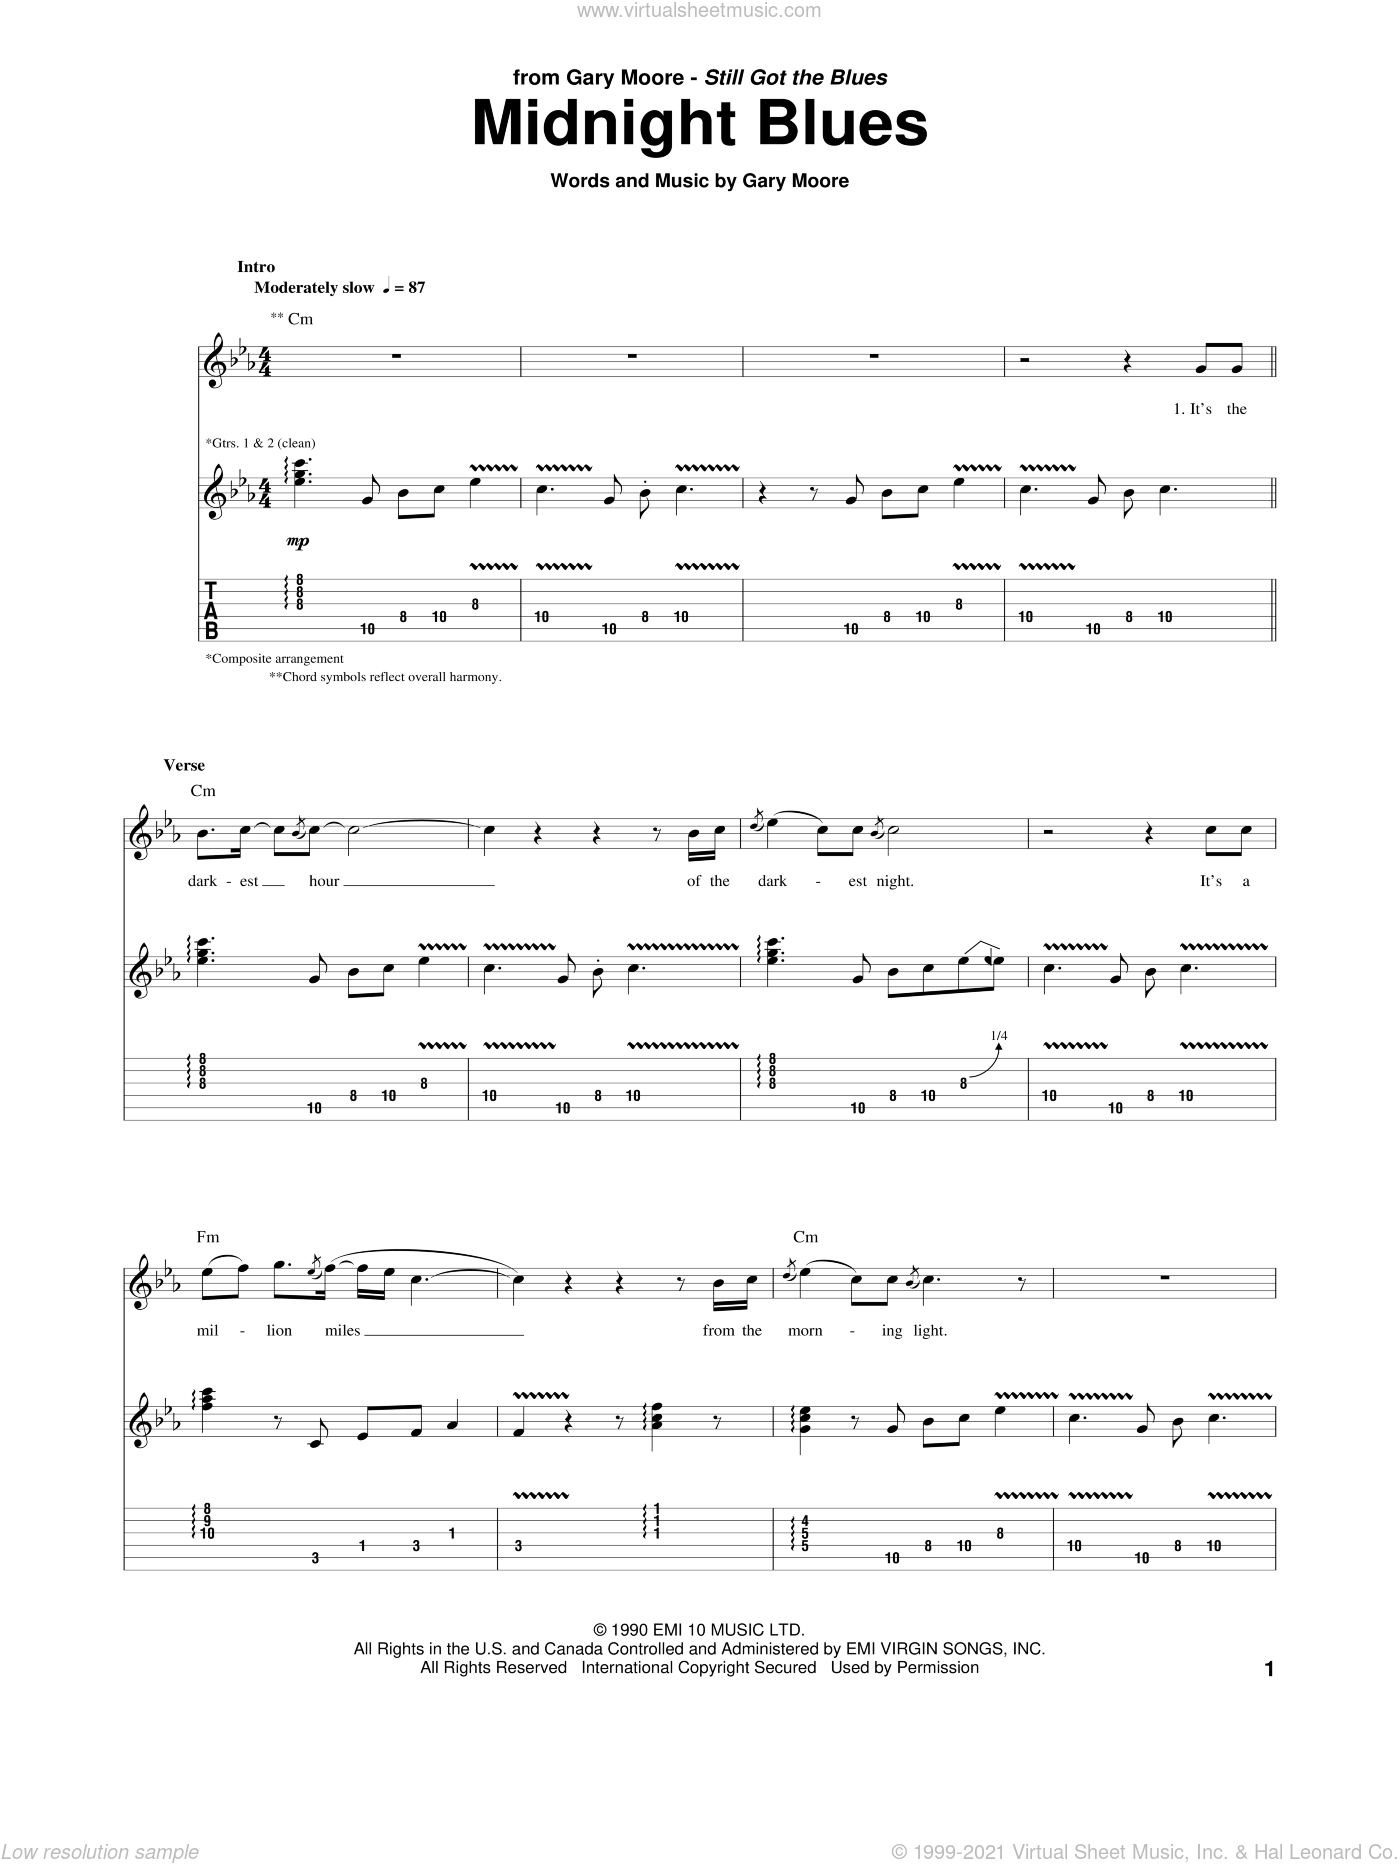 free downloadable blues guitar songs with tablature